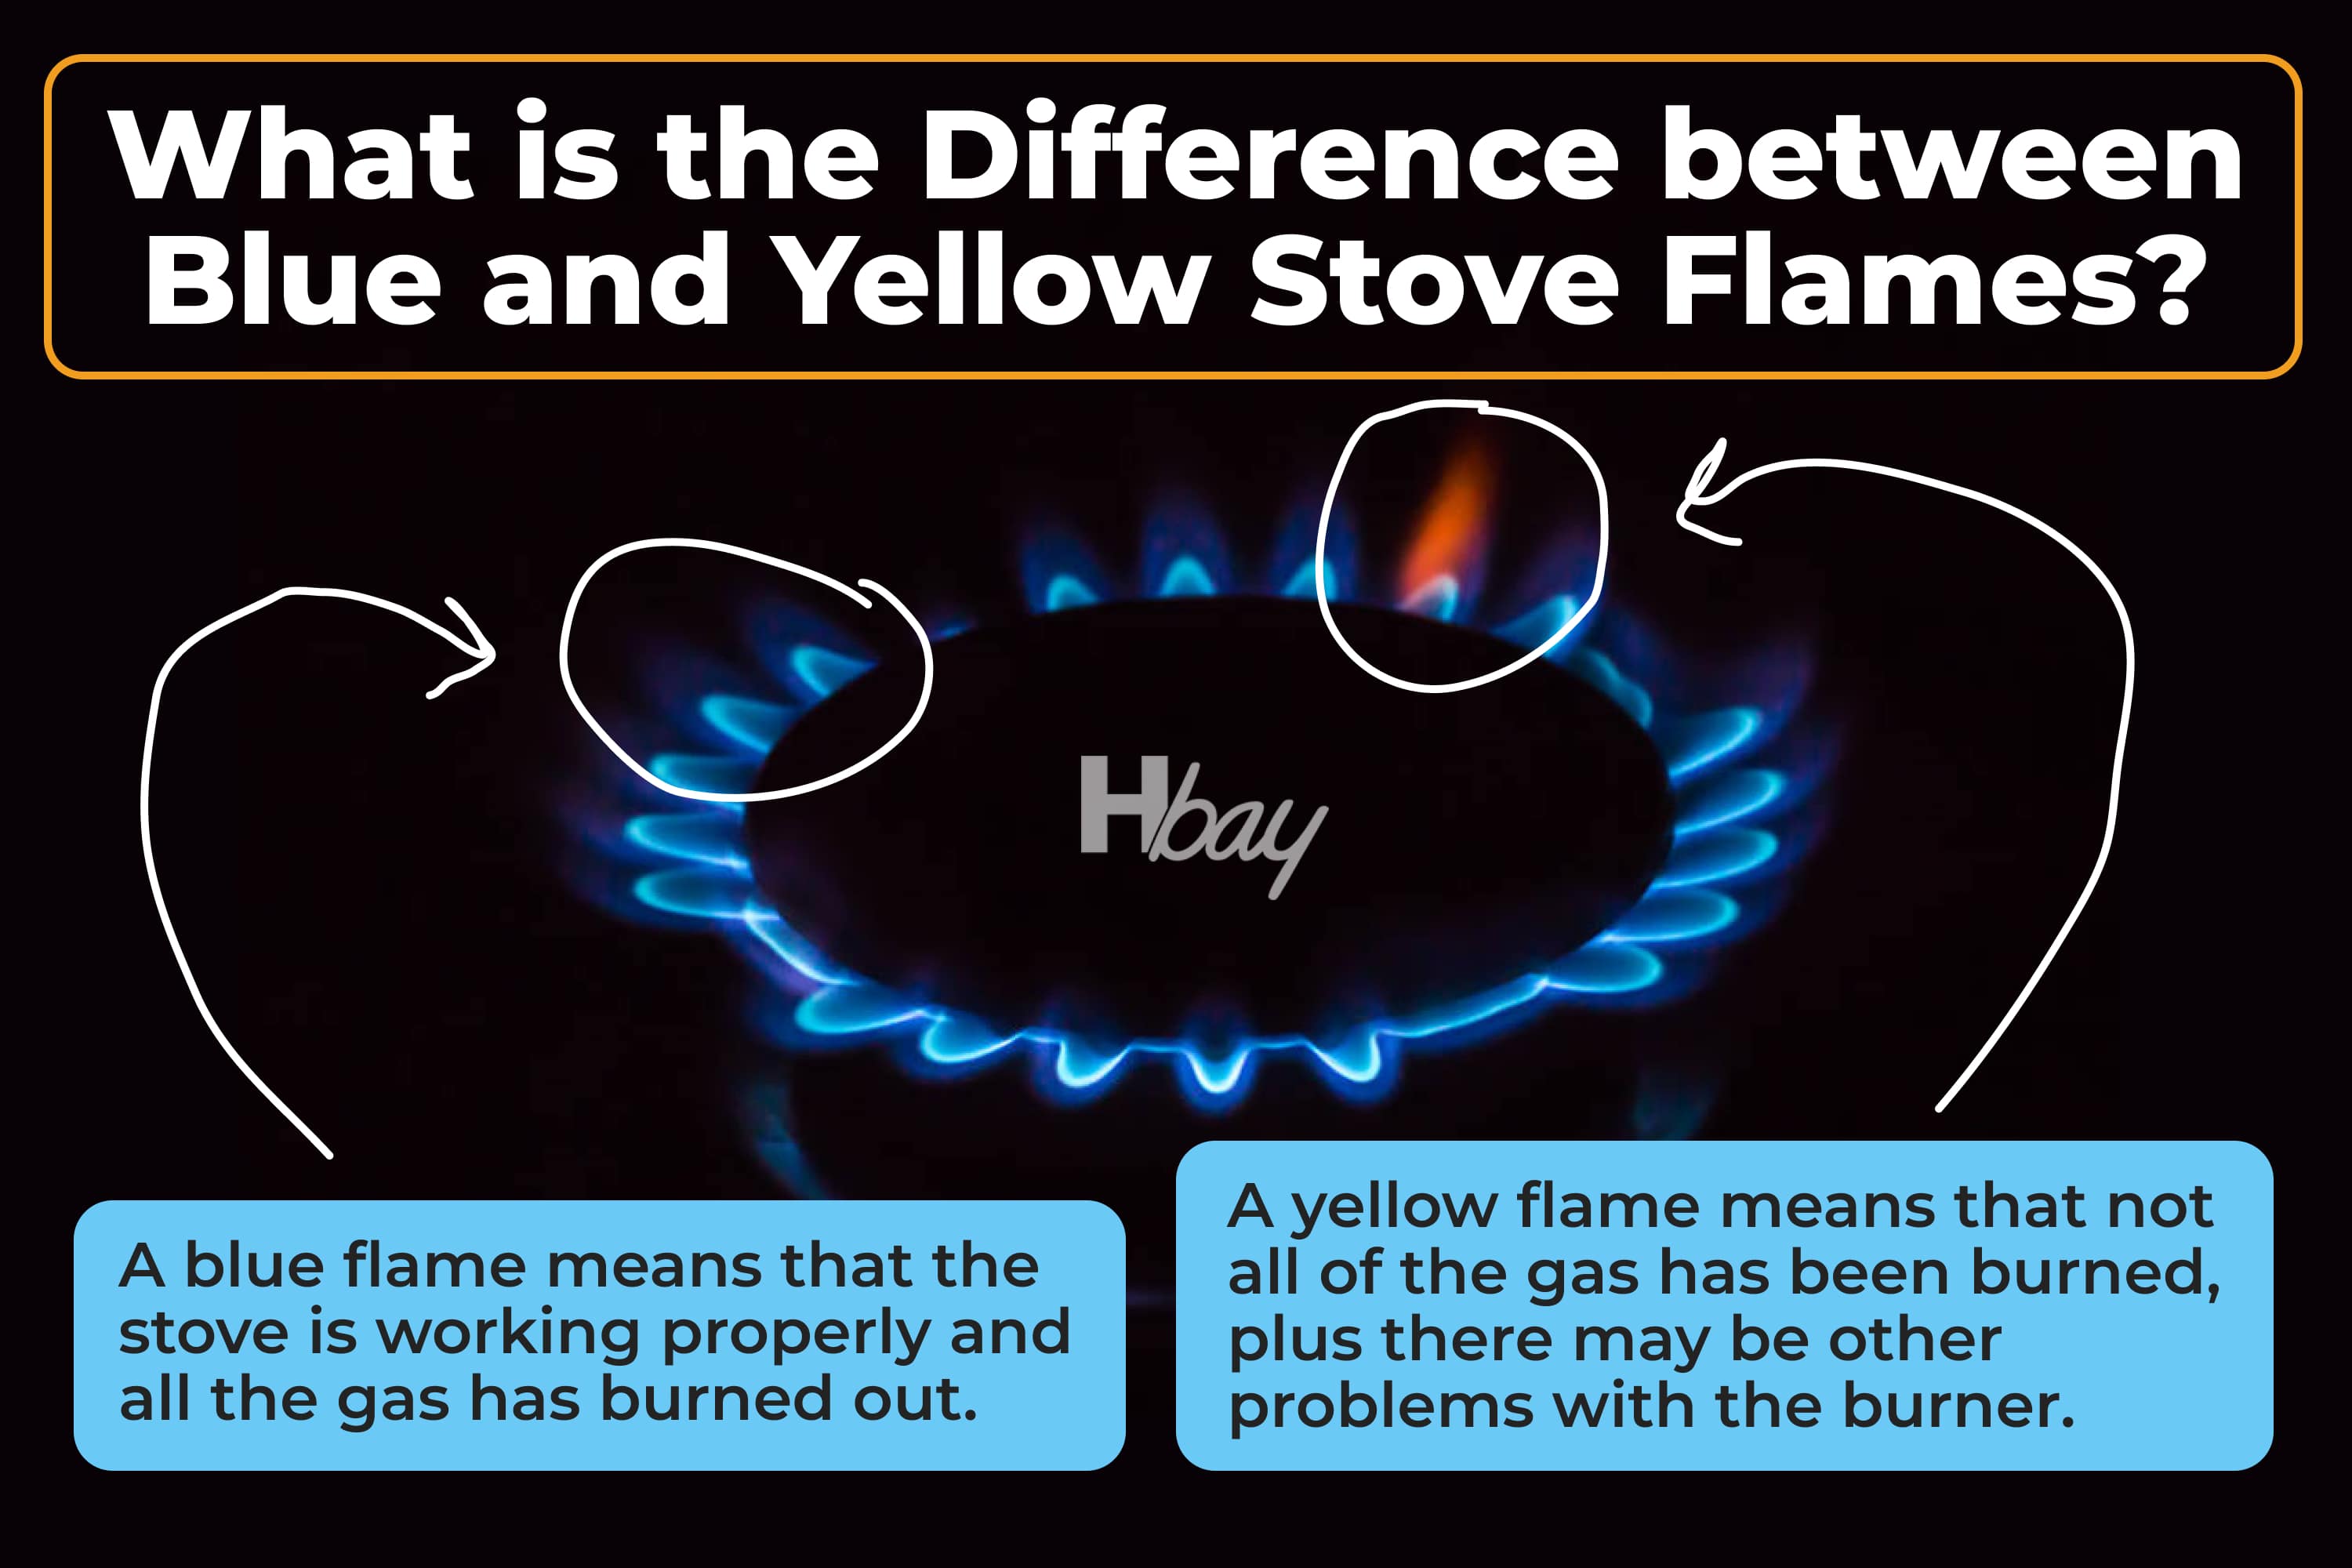 What is the difference between blue and yellow stove flames